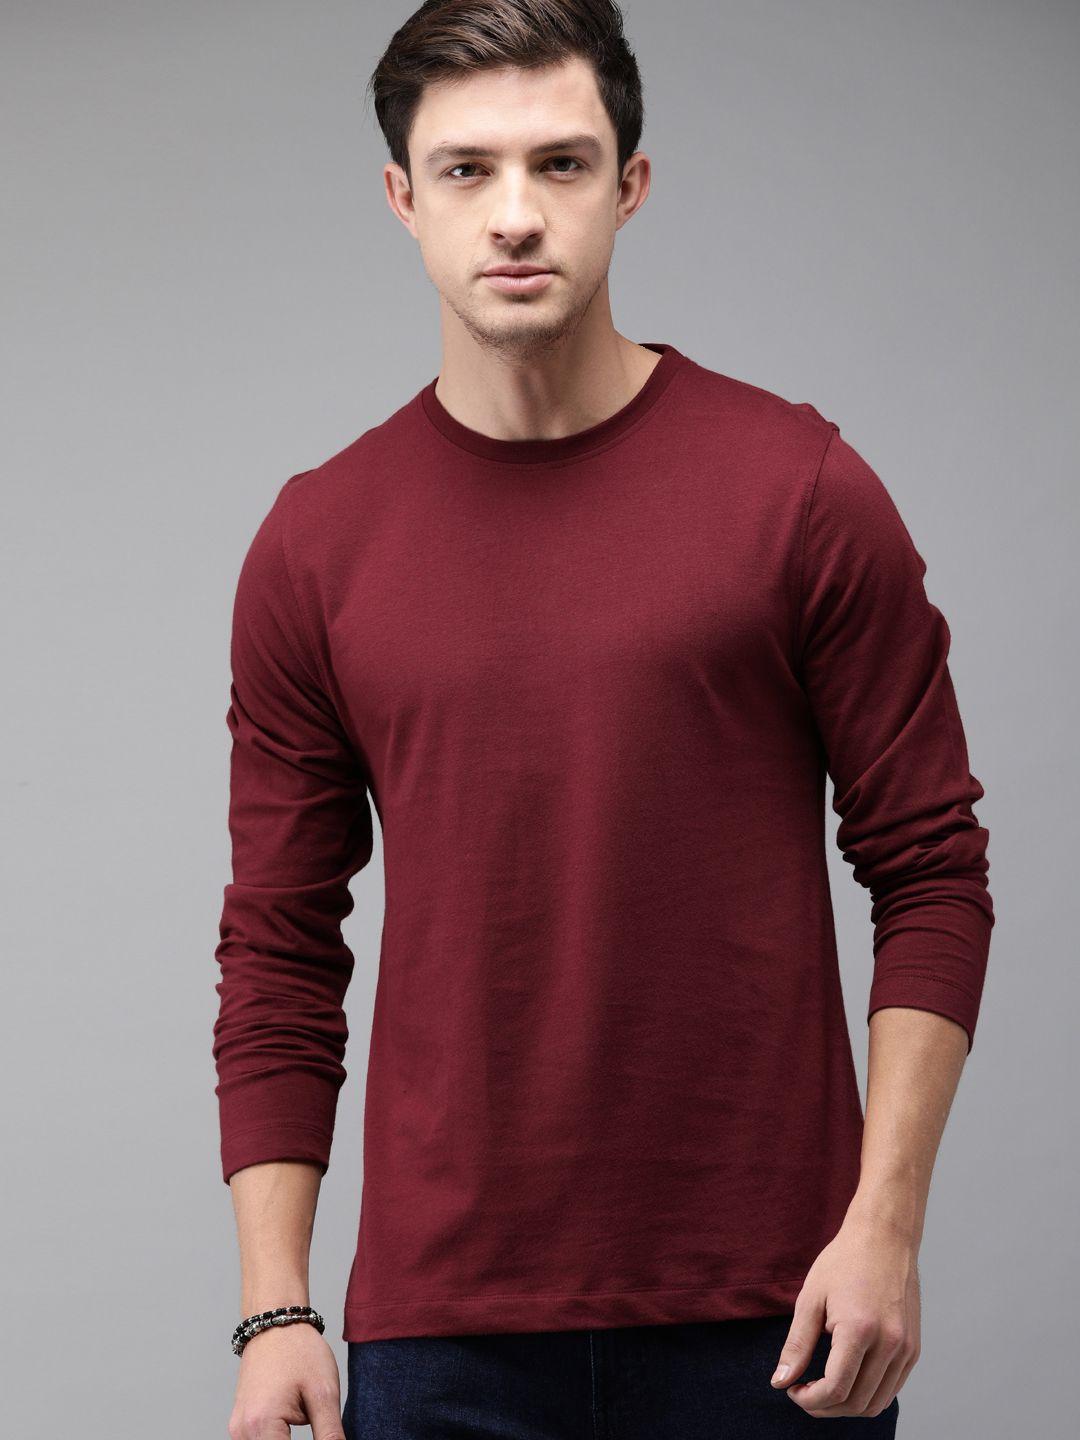 the roadster lifestyle co men maroon solid round neck t-shirt